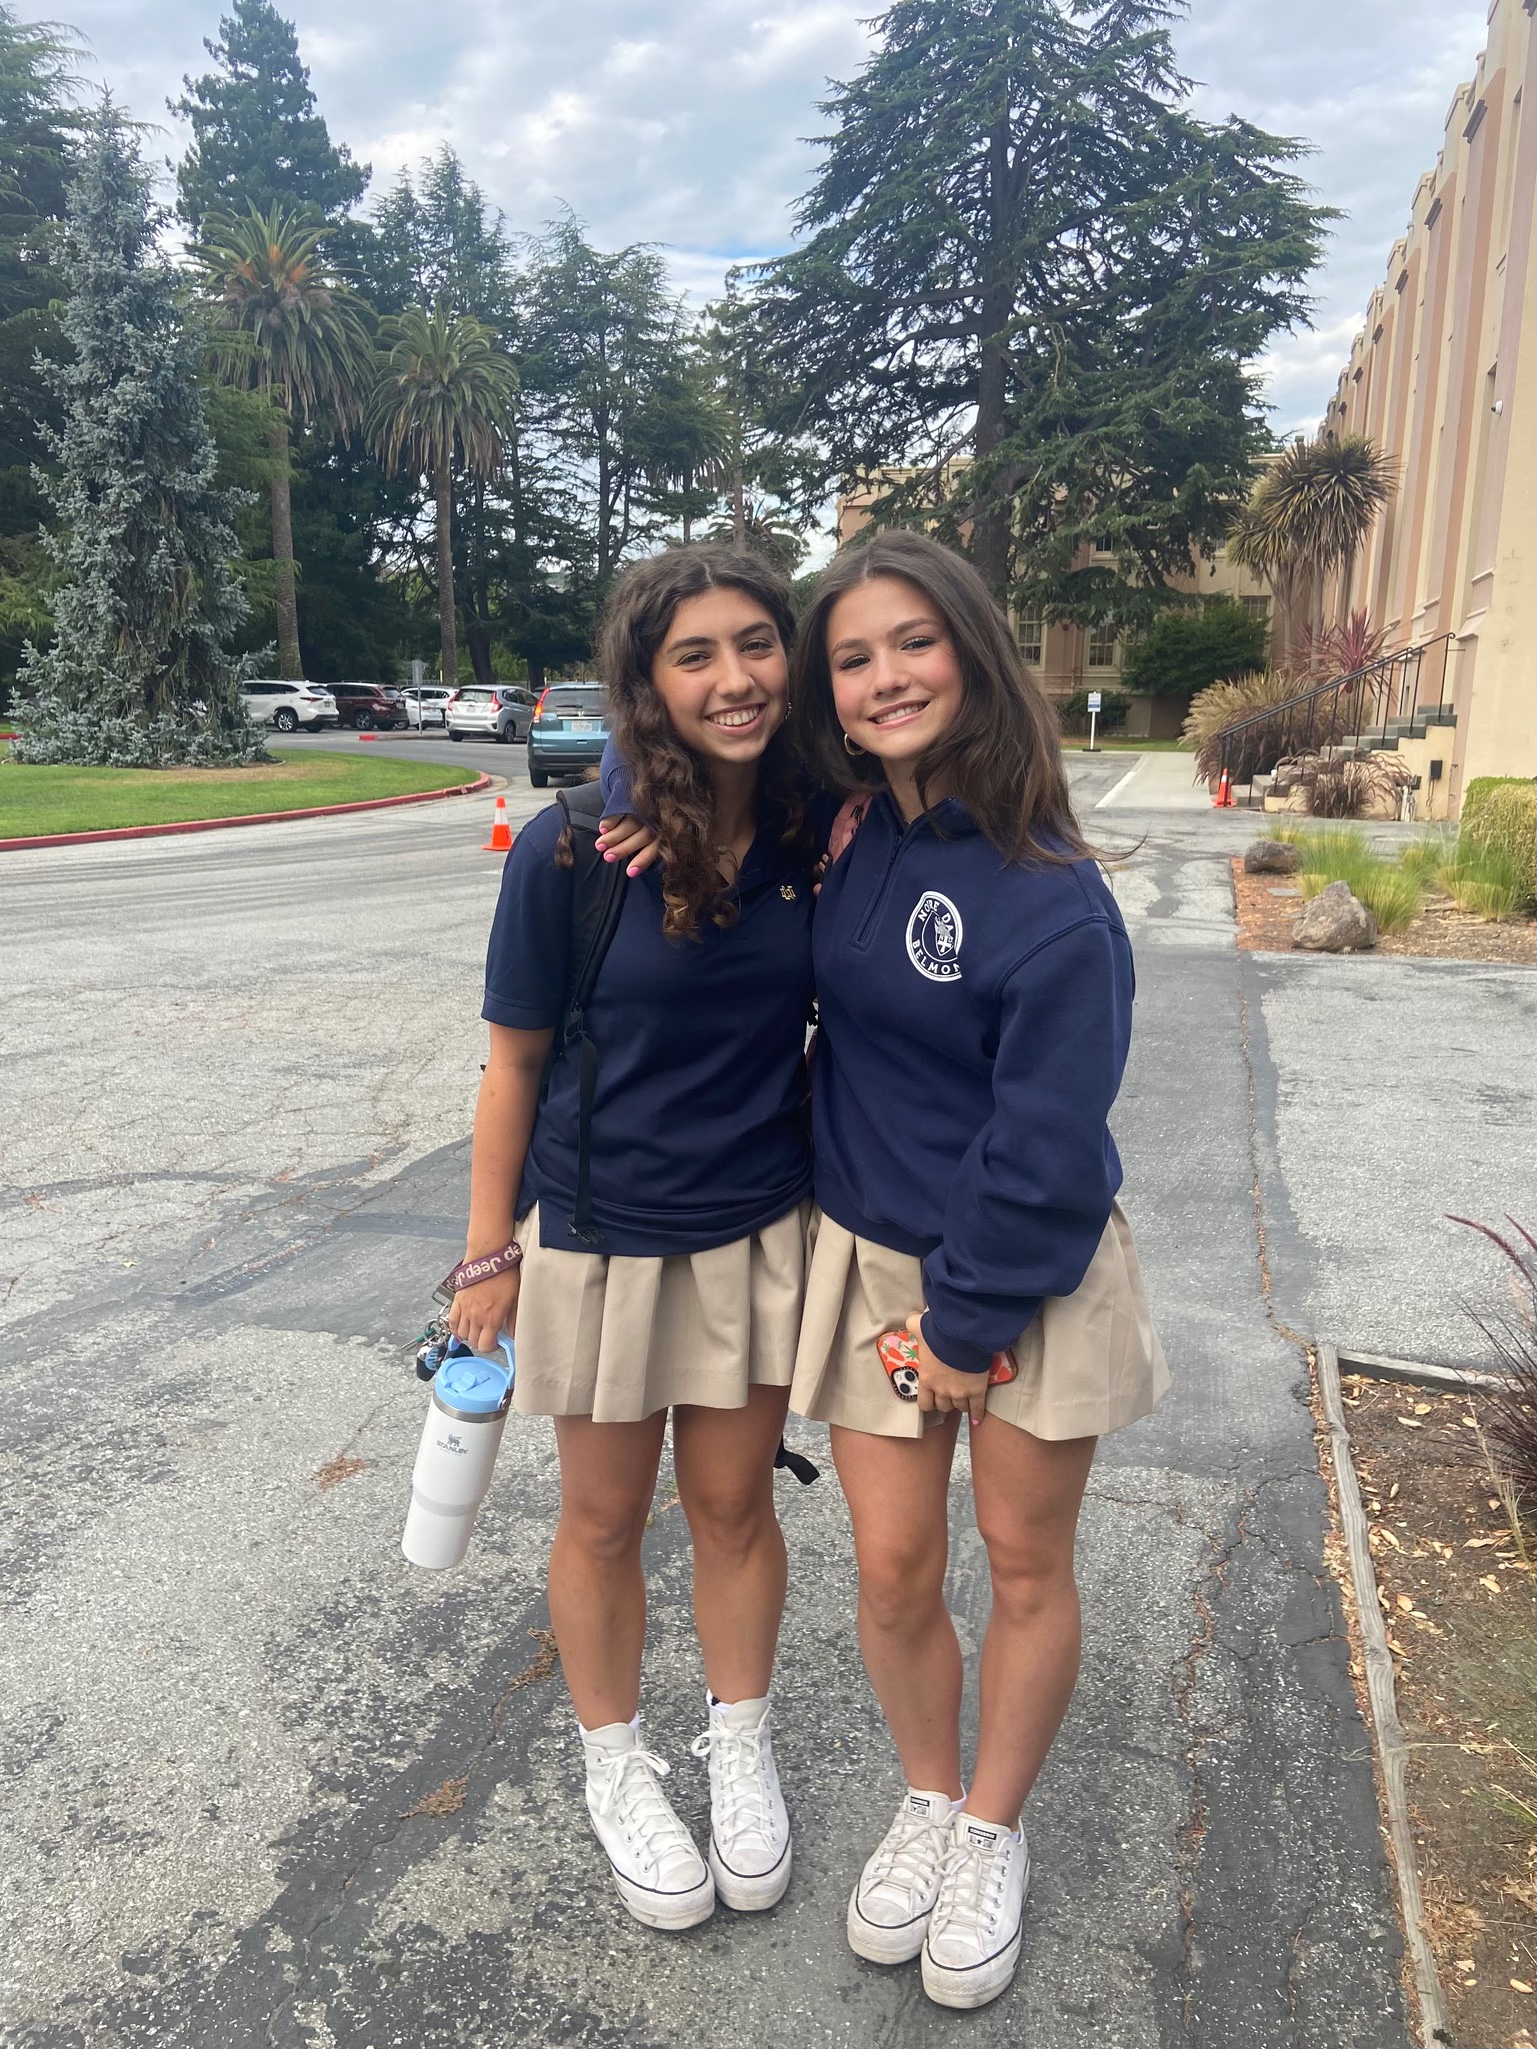 Sisters Sabrina and Olivia Philip arrive at school together.